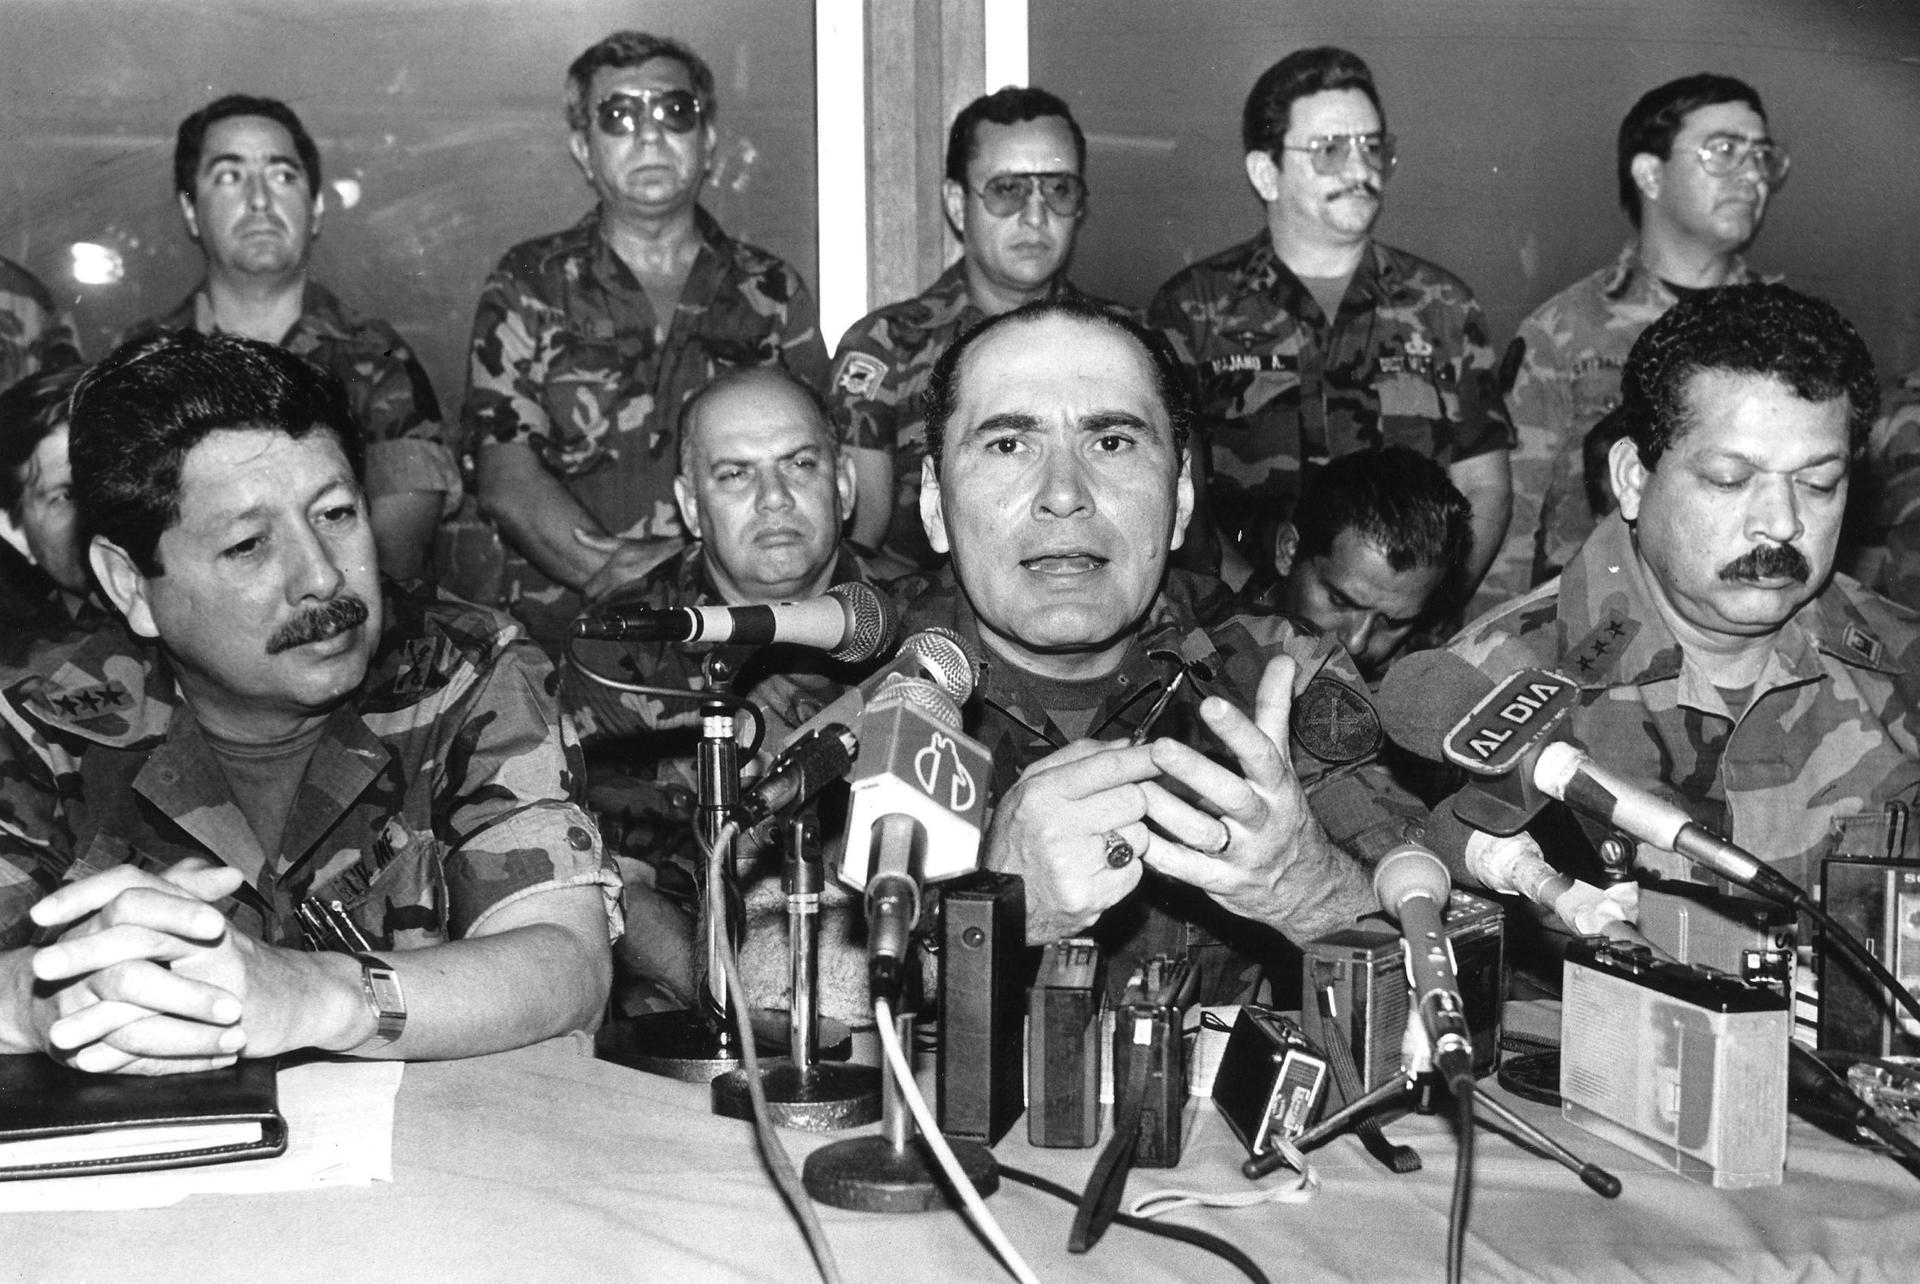 El Salvador's defense minister, General Rafael Humberto Larios, speaks during a news conference in San Salvador in a 1990 file photo. Larios and eight other former Salvadoran soldiers were arrested in 2011 for suspected involvement in the 1989 killing of 